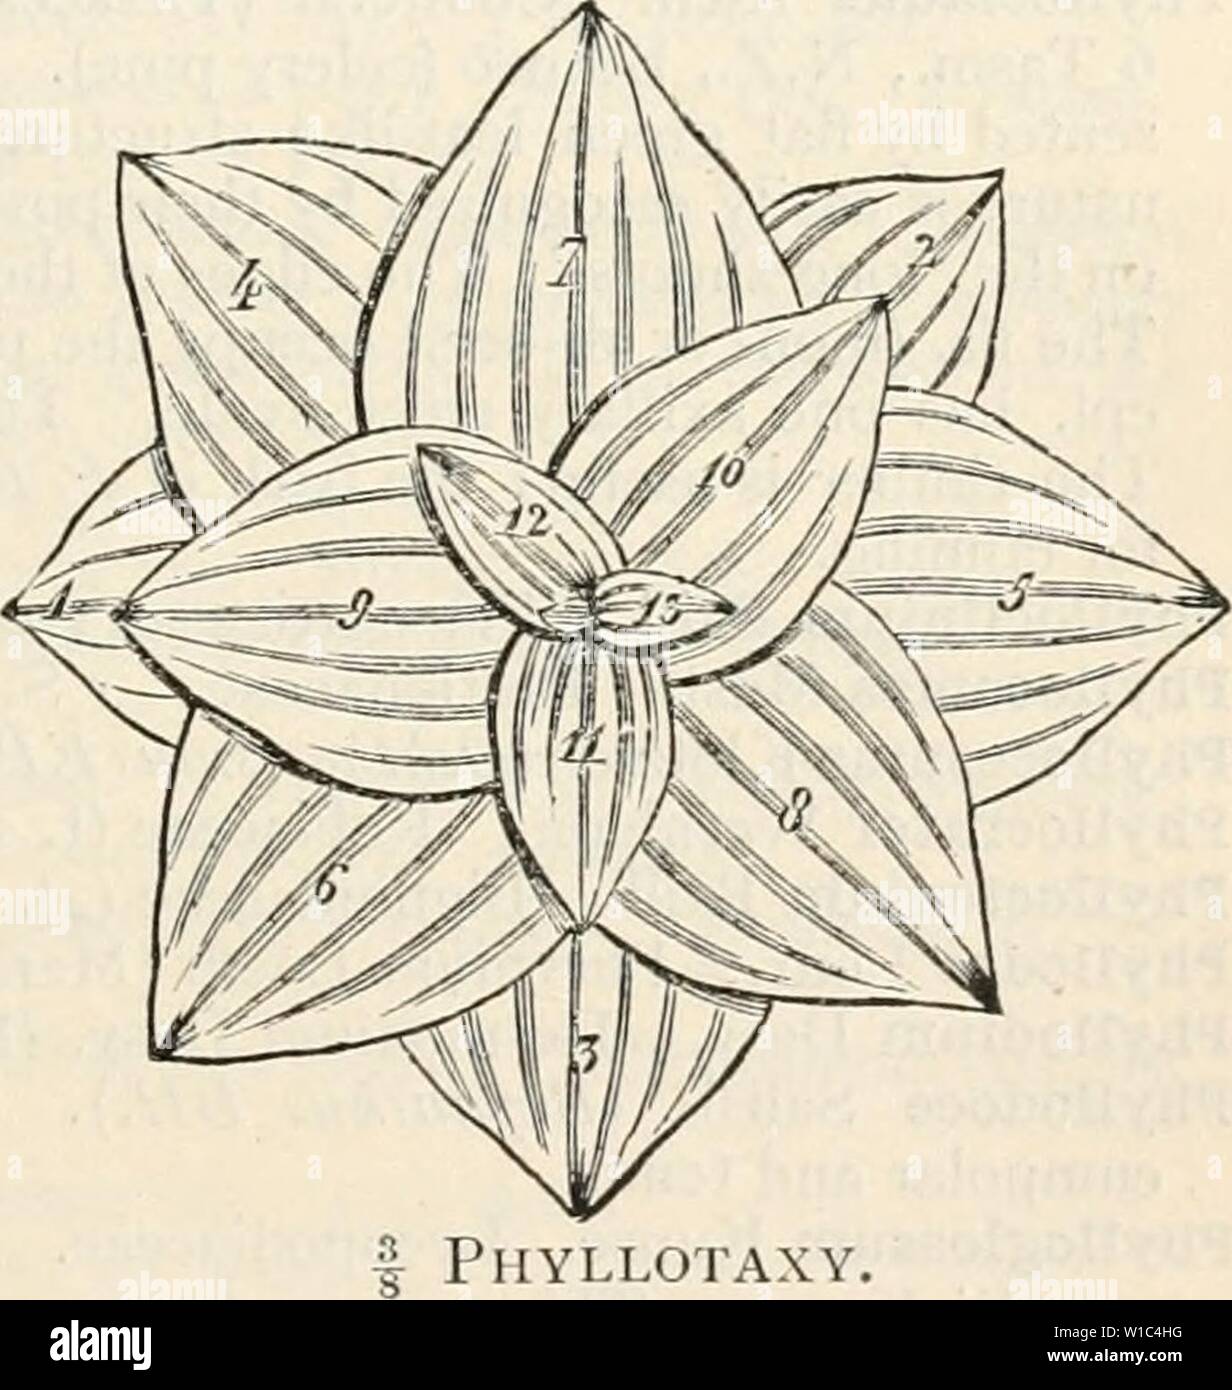 Archive image from page 522 of A dictionary of the flowering. A dictionary of the flowering plants and ferns . dictionaryofflow00will Year: 1919  PHYLLO- 5°7 Phyllarthron DC. Bignoniaceae (4). 6 Madag., Mascarenes. The 1. is reduced to a jointed winged petiole. Phyllepidum Rafin. Amarantaceae (inc. sed.). Gen. dubium. i N. Am. Phyllis L. Rubiaceae (n. 7). i Canaries, Madeira. Phyllitis Ludwig. Polypodiaceae. 10 trop. and subtrop. Phyllo- (Gr. pref.), -phyllous (suff.), leaf; -clade, a stem structure usu. ± flattened and serving 1. purposes, Asparagus, Baccharis, Bos- siaea, Carmichaelia, ffibb Stock Photo